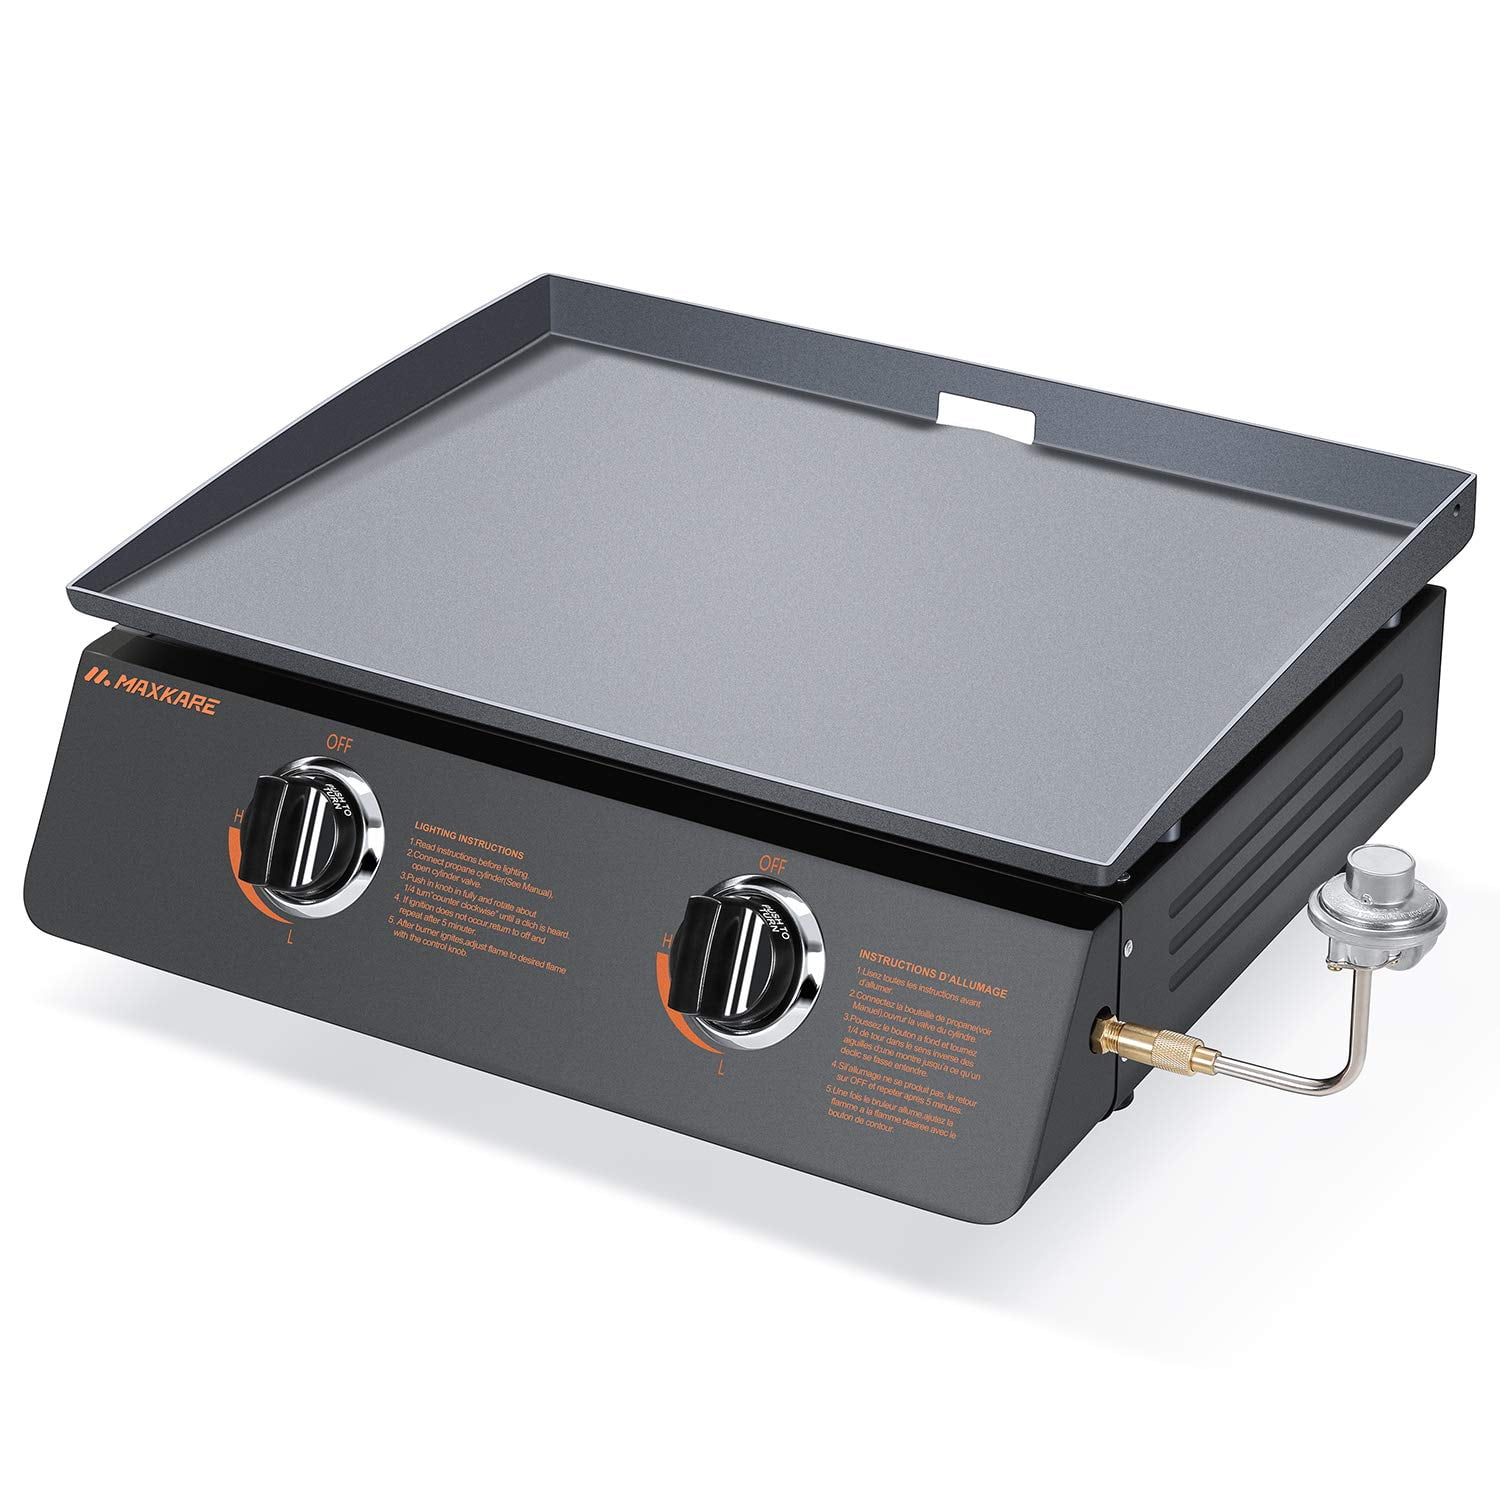 MaxKare 2 Burners Tabletop Gas Grill 22 Gas Griddle BBQ Propane Portable Grill with 20000 BTU for Outdoor Camping and Tailgating - Walmart.com